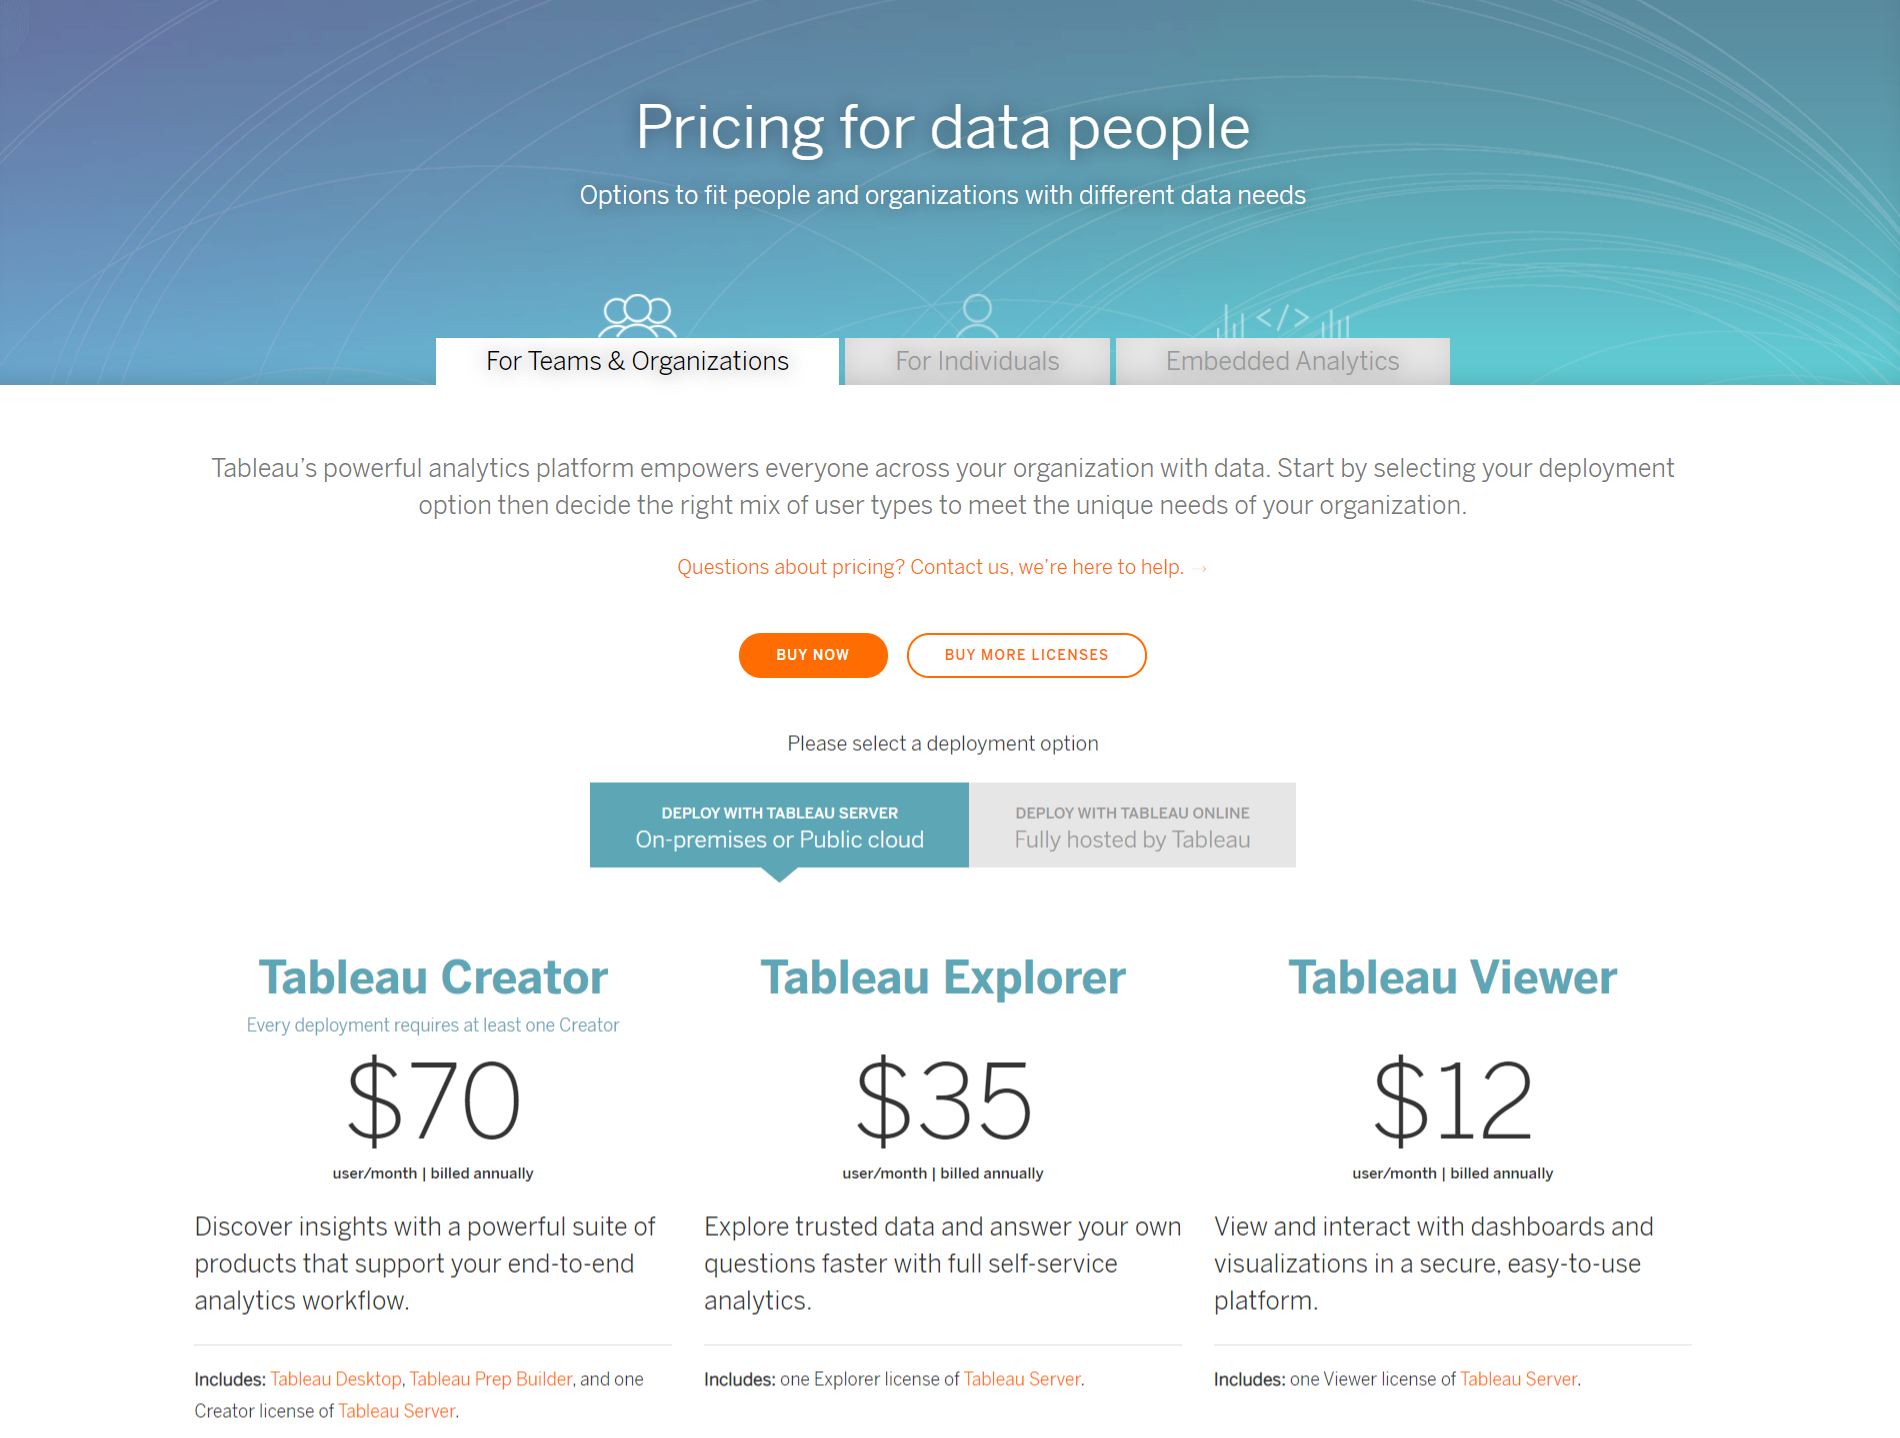 Tableau pricing in 2021, for teams and organization